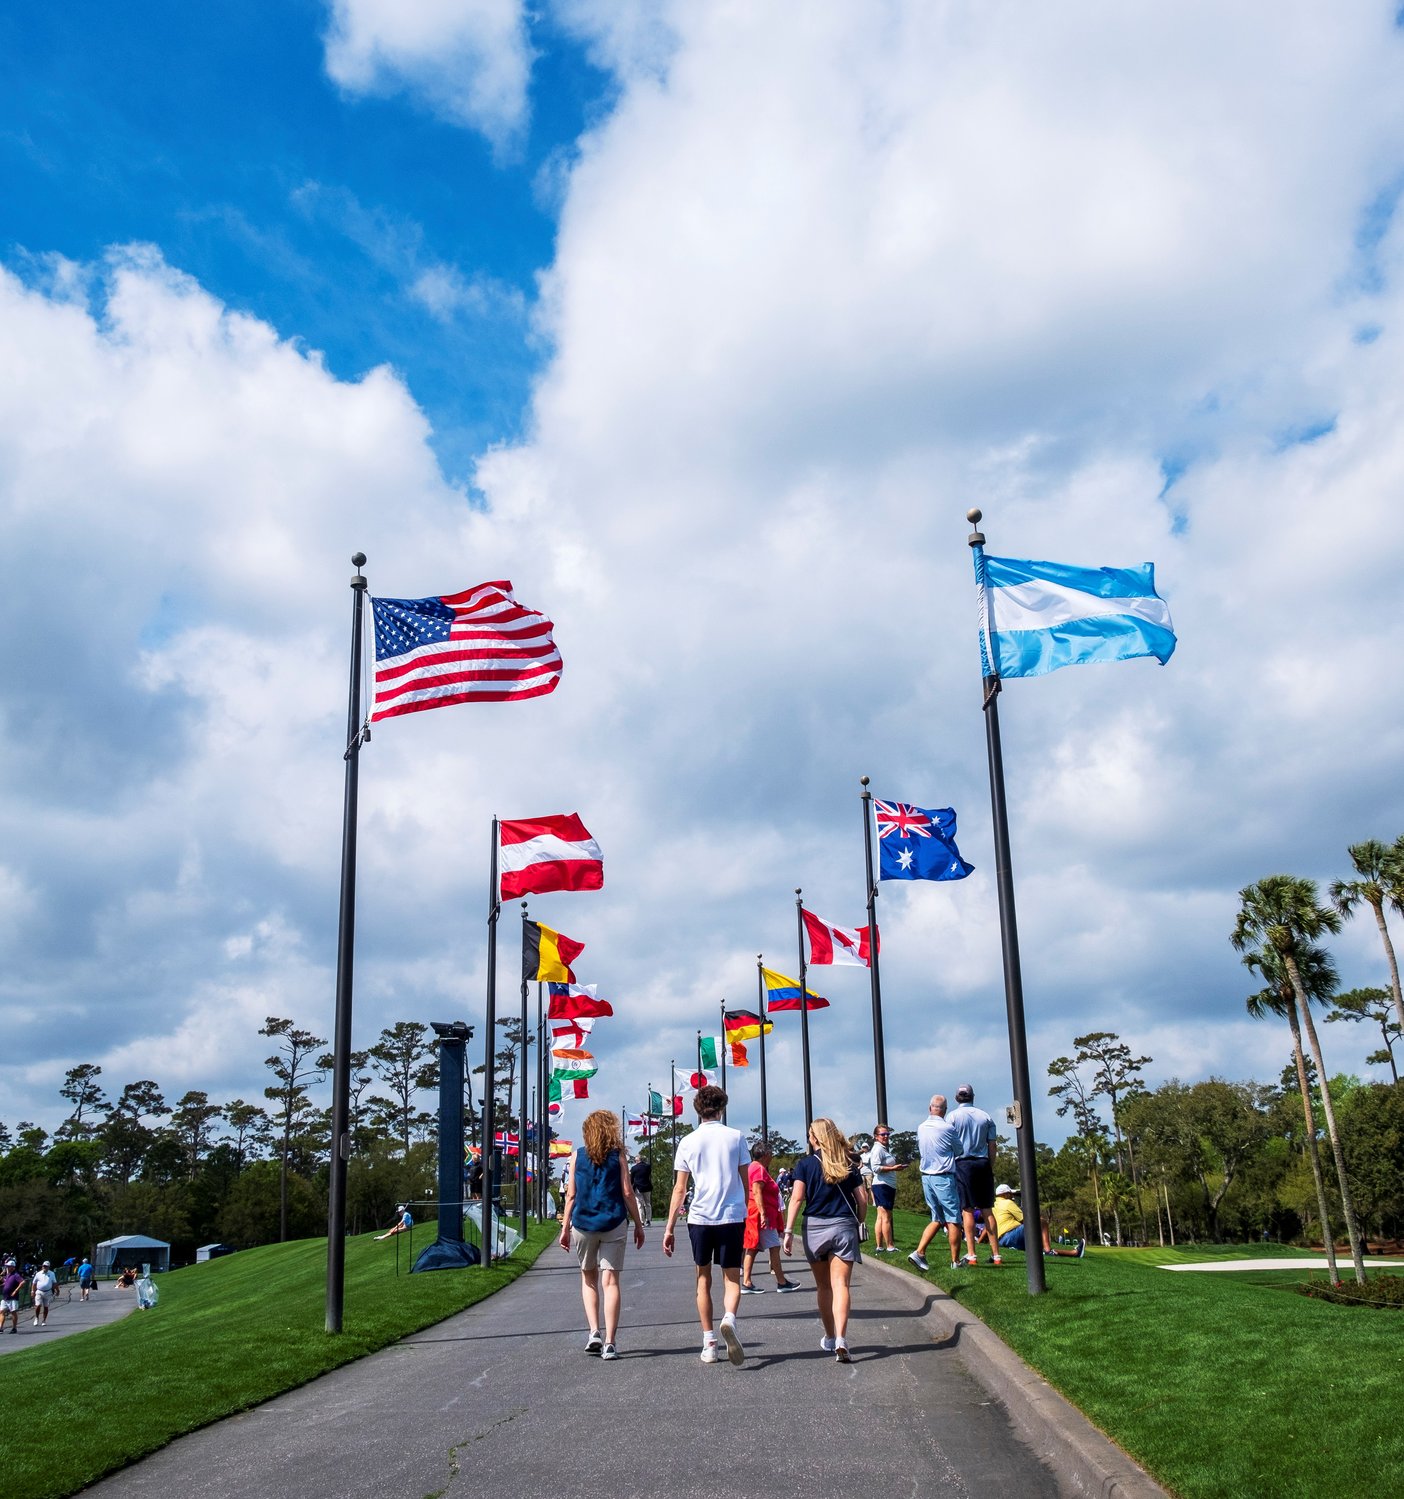 Fans walk across the grounds at TPC Sawgrass on Wednesday, March 9, during THE PLAYERS Championship.